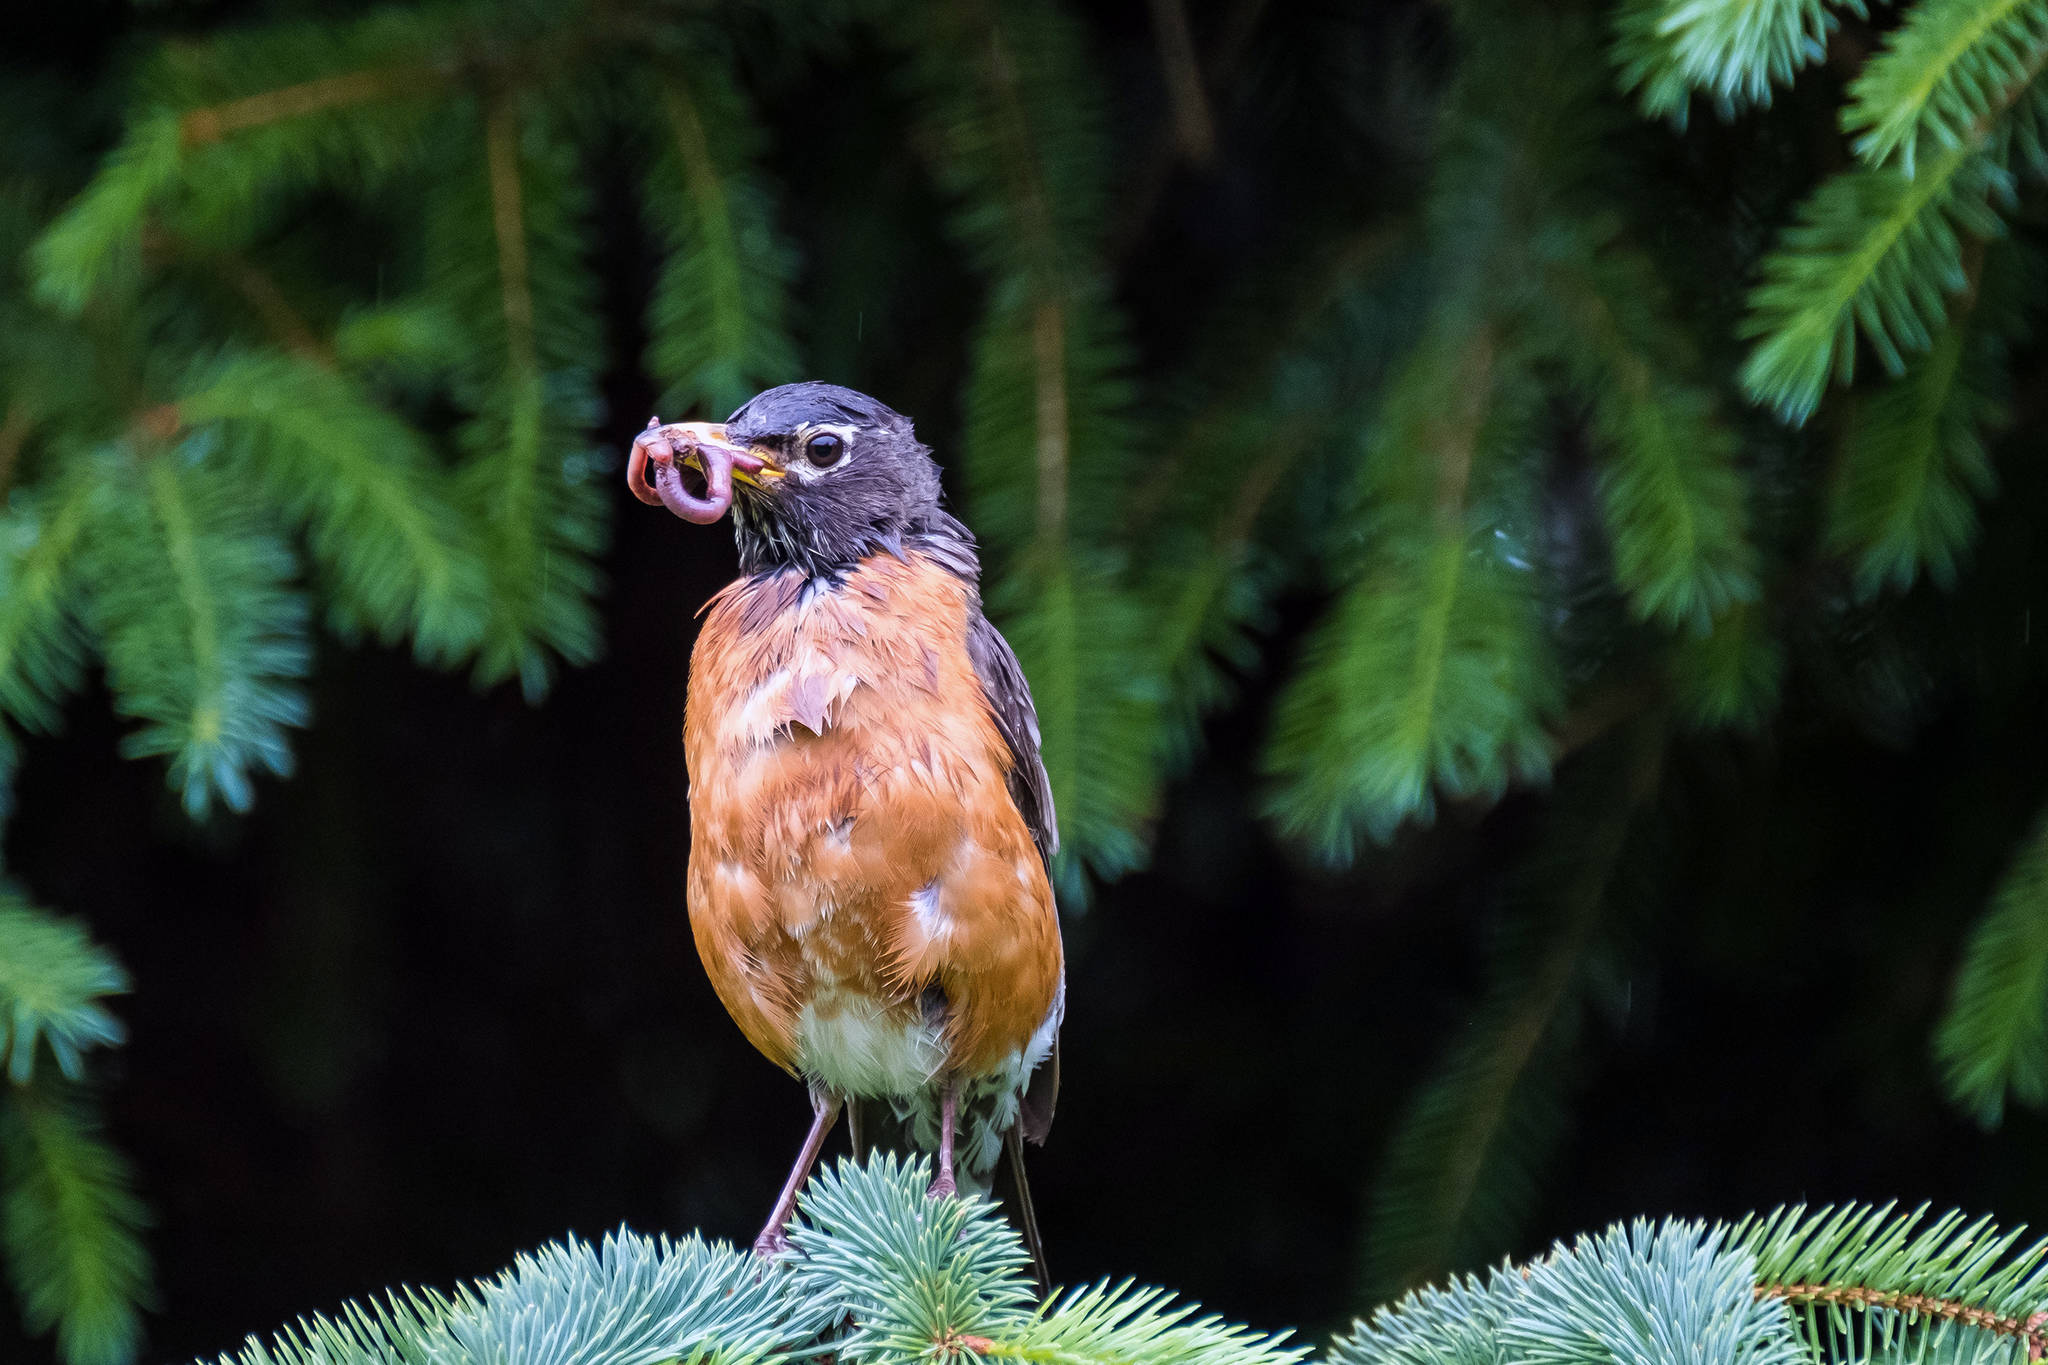 An adult American Robin brings food to young robins in the nest, May 3, 2019. (Courtesy Photo | Betsy Fischer)